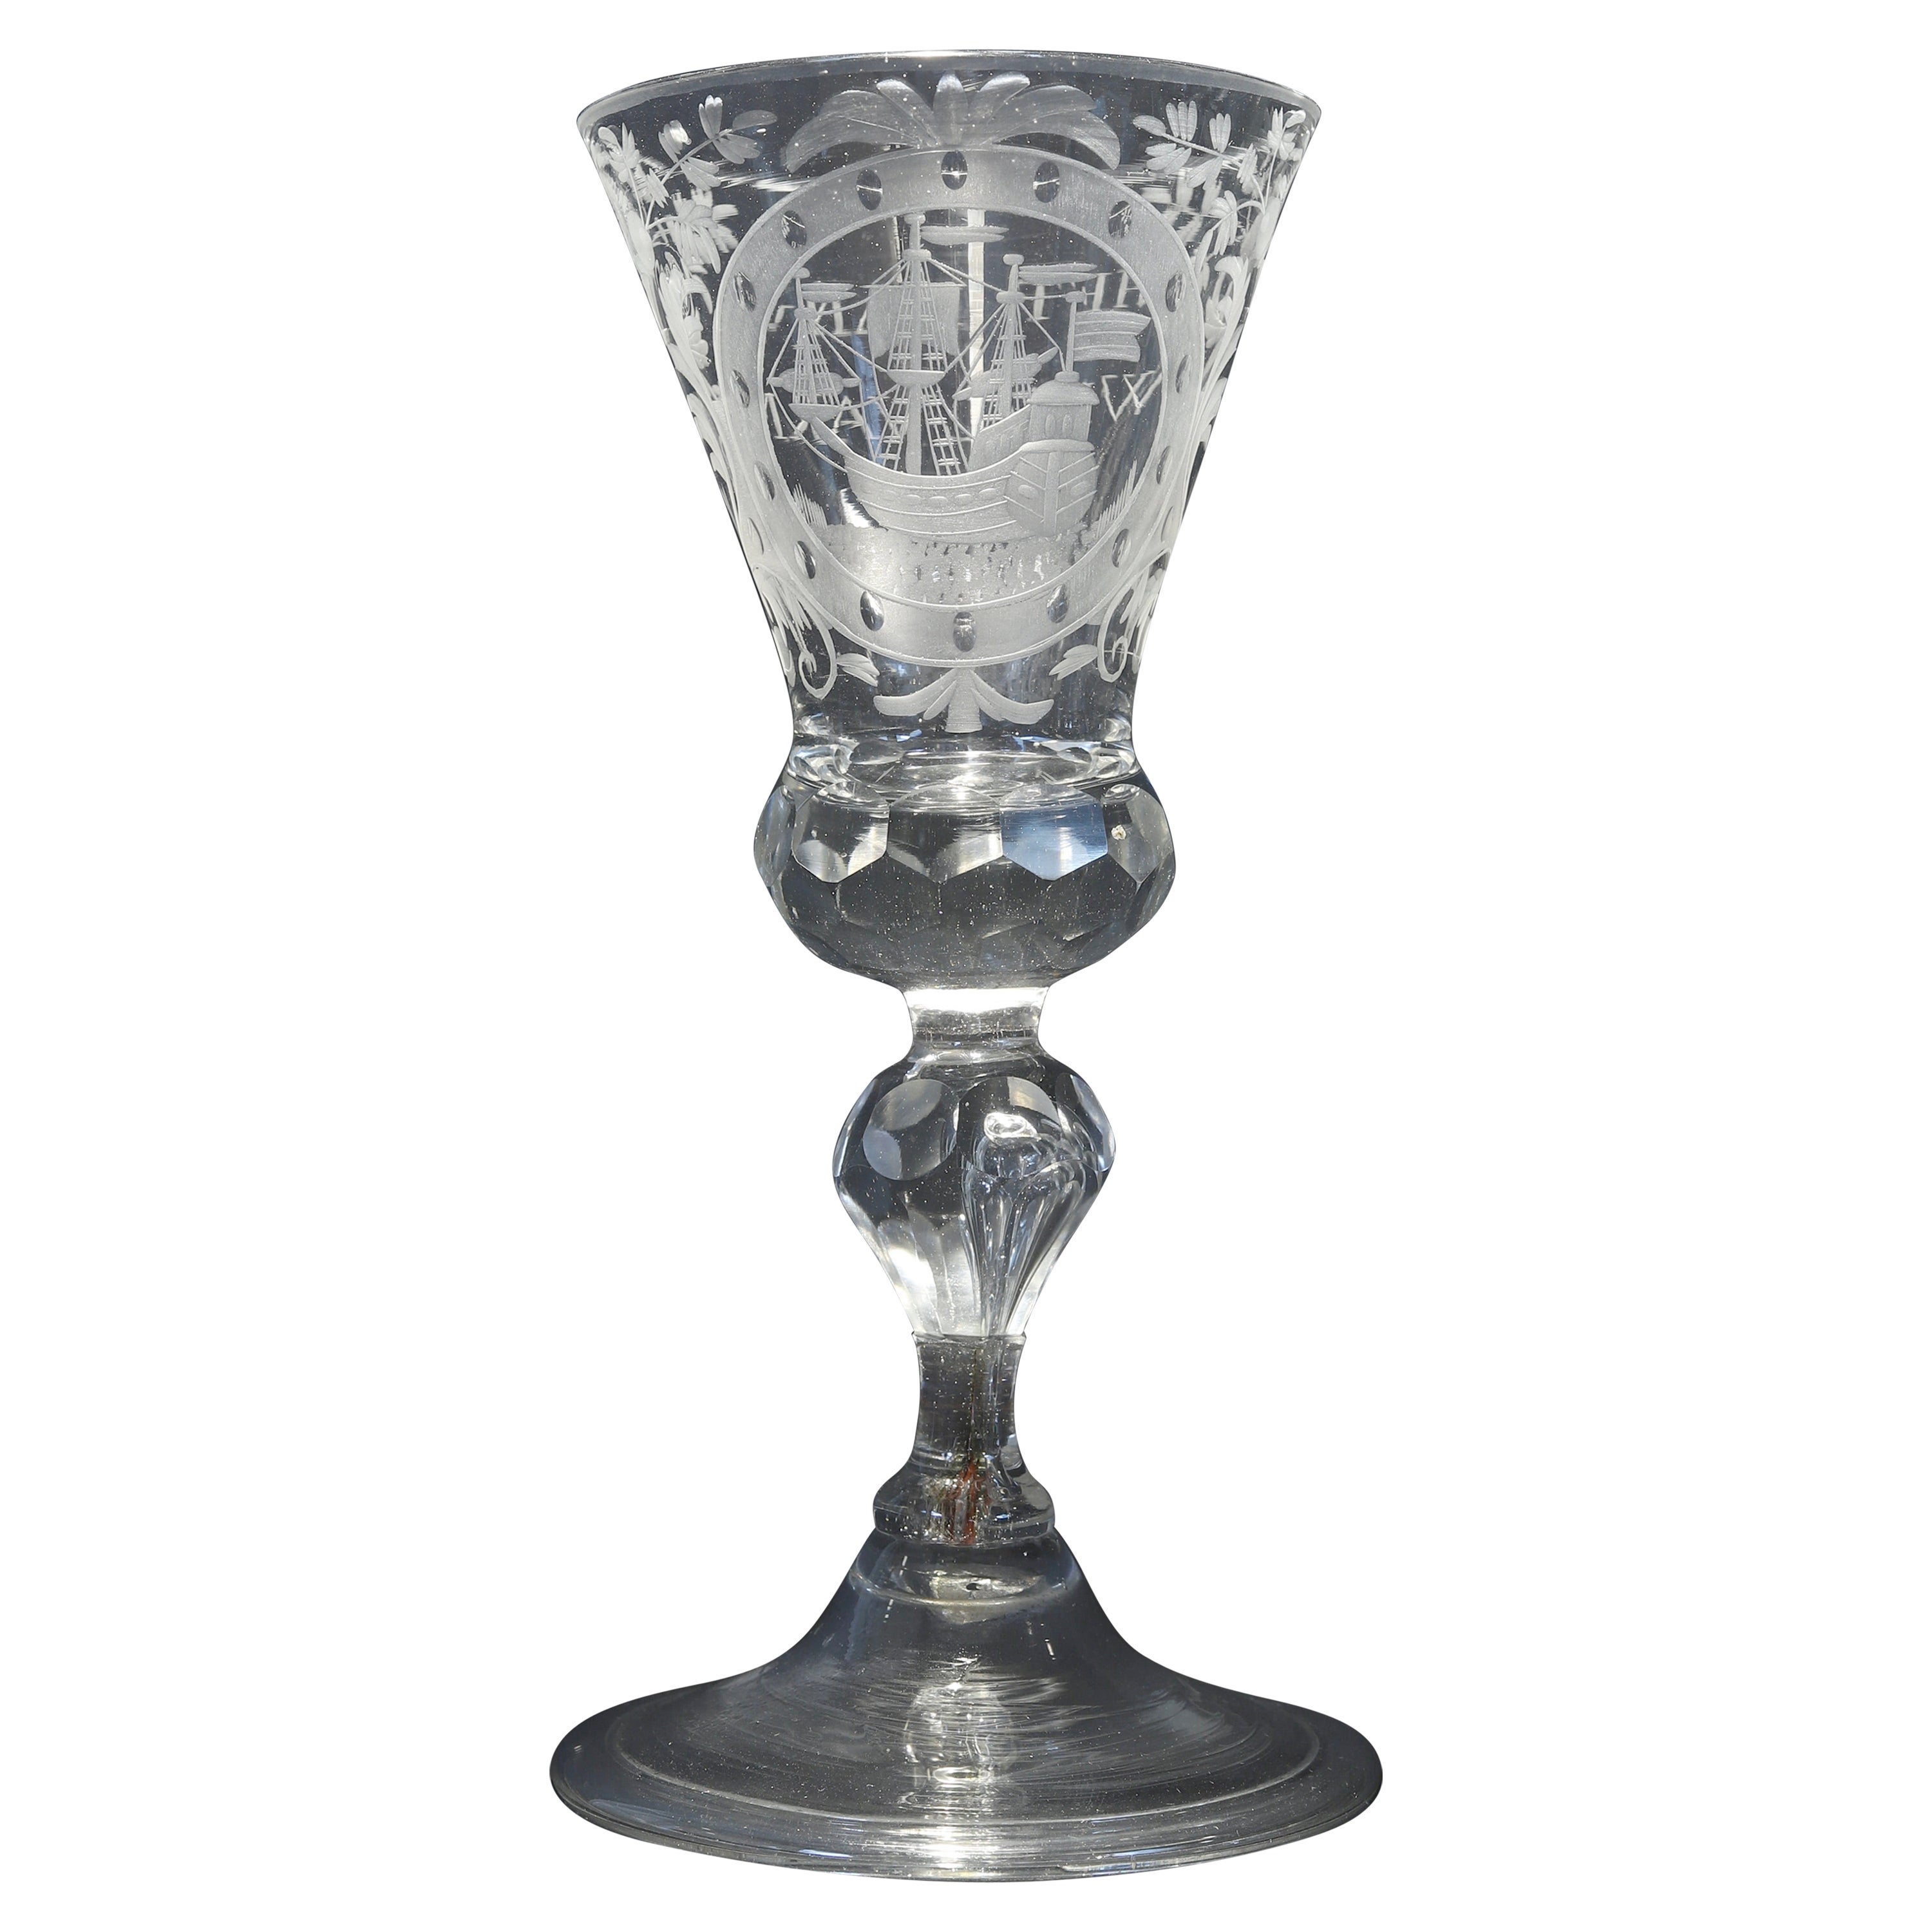 A Dutch Engraved Prosperity of the Trade Wine Glass, Mid 18th Century For Sale